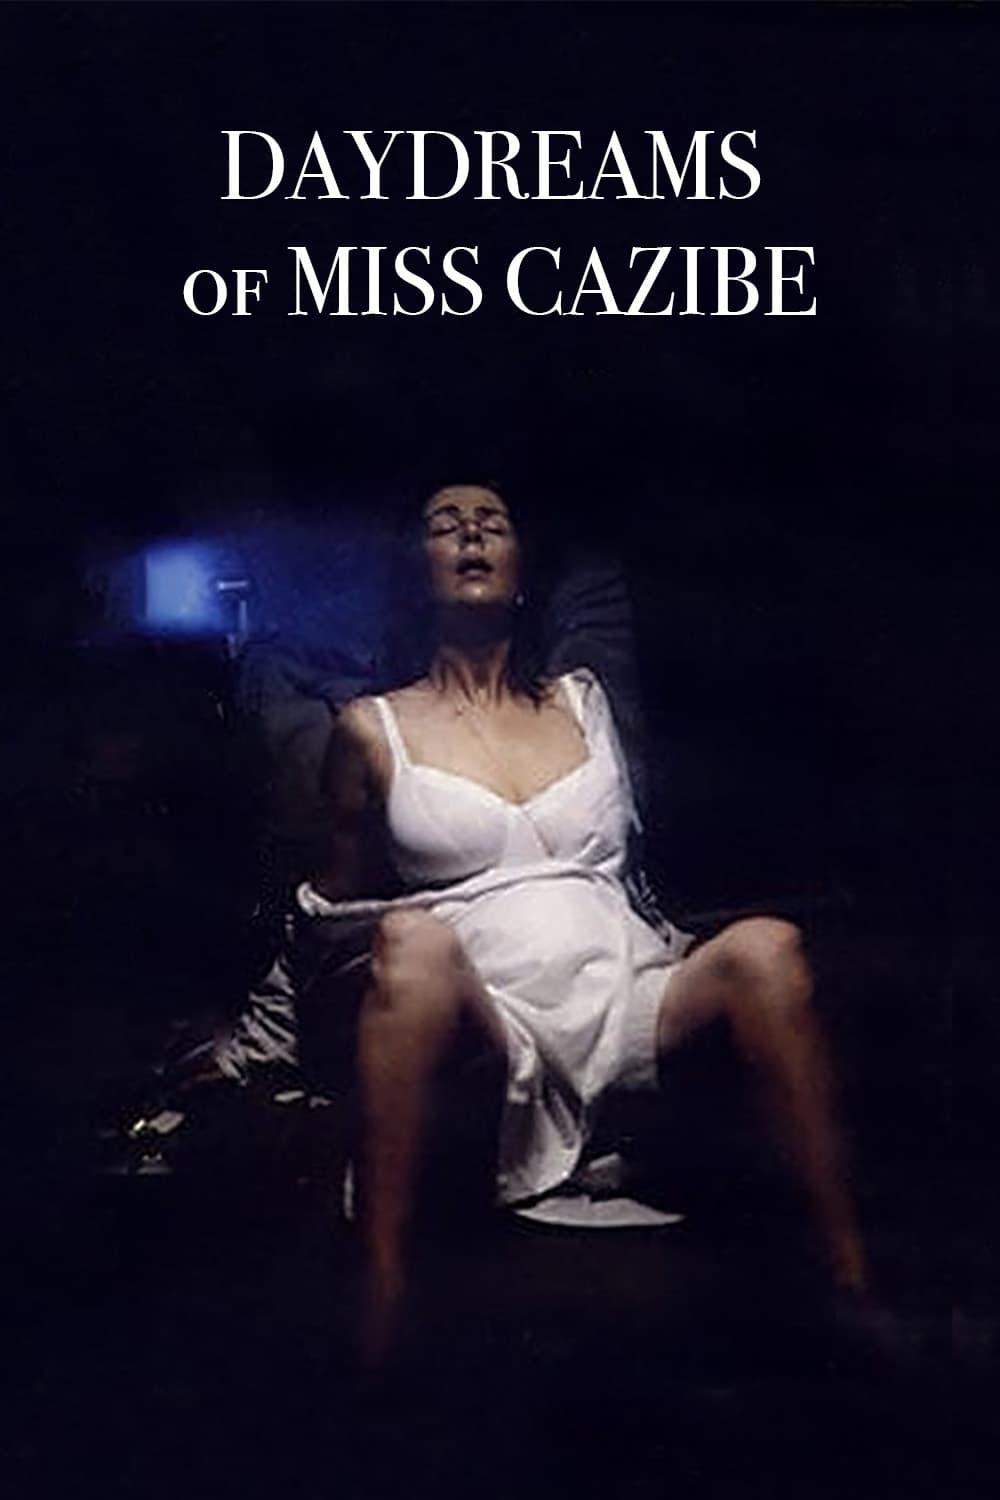 Daydreams of Miss Cazibe poster